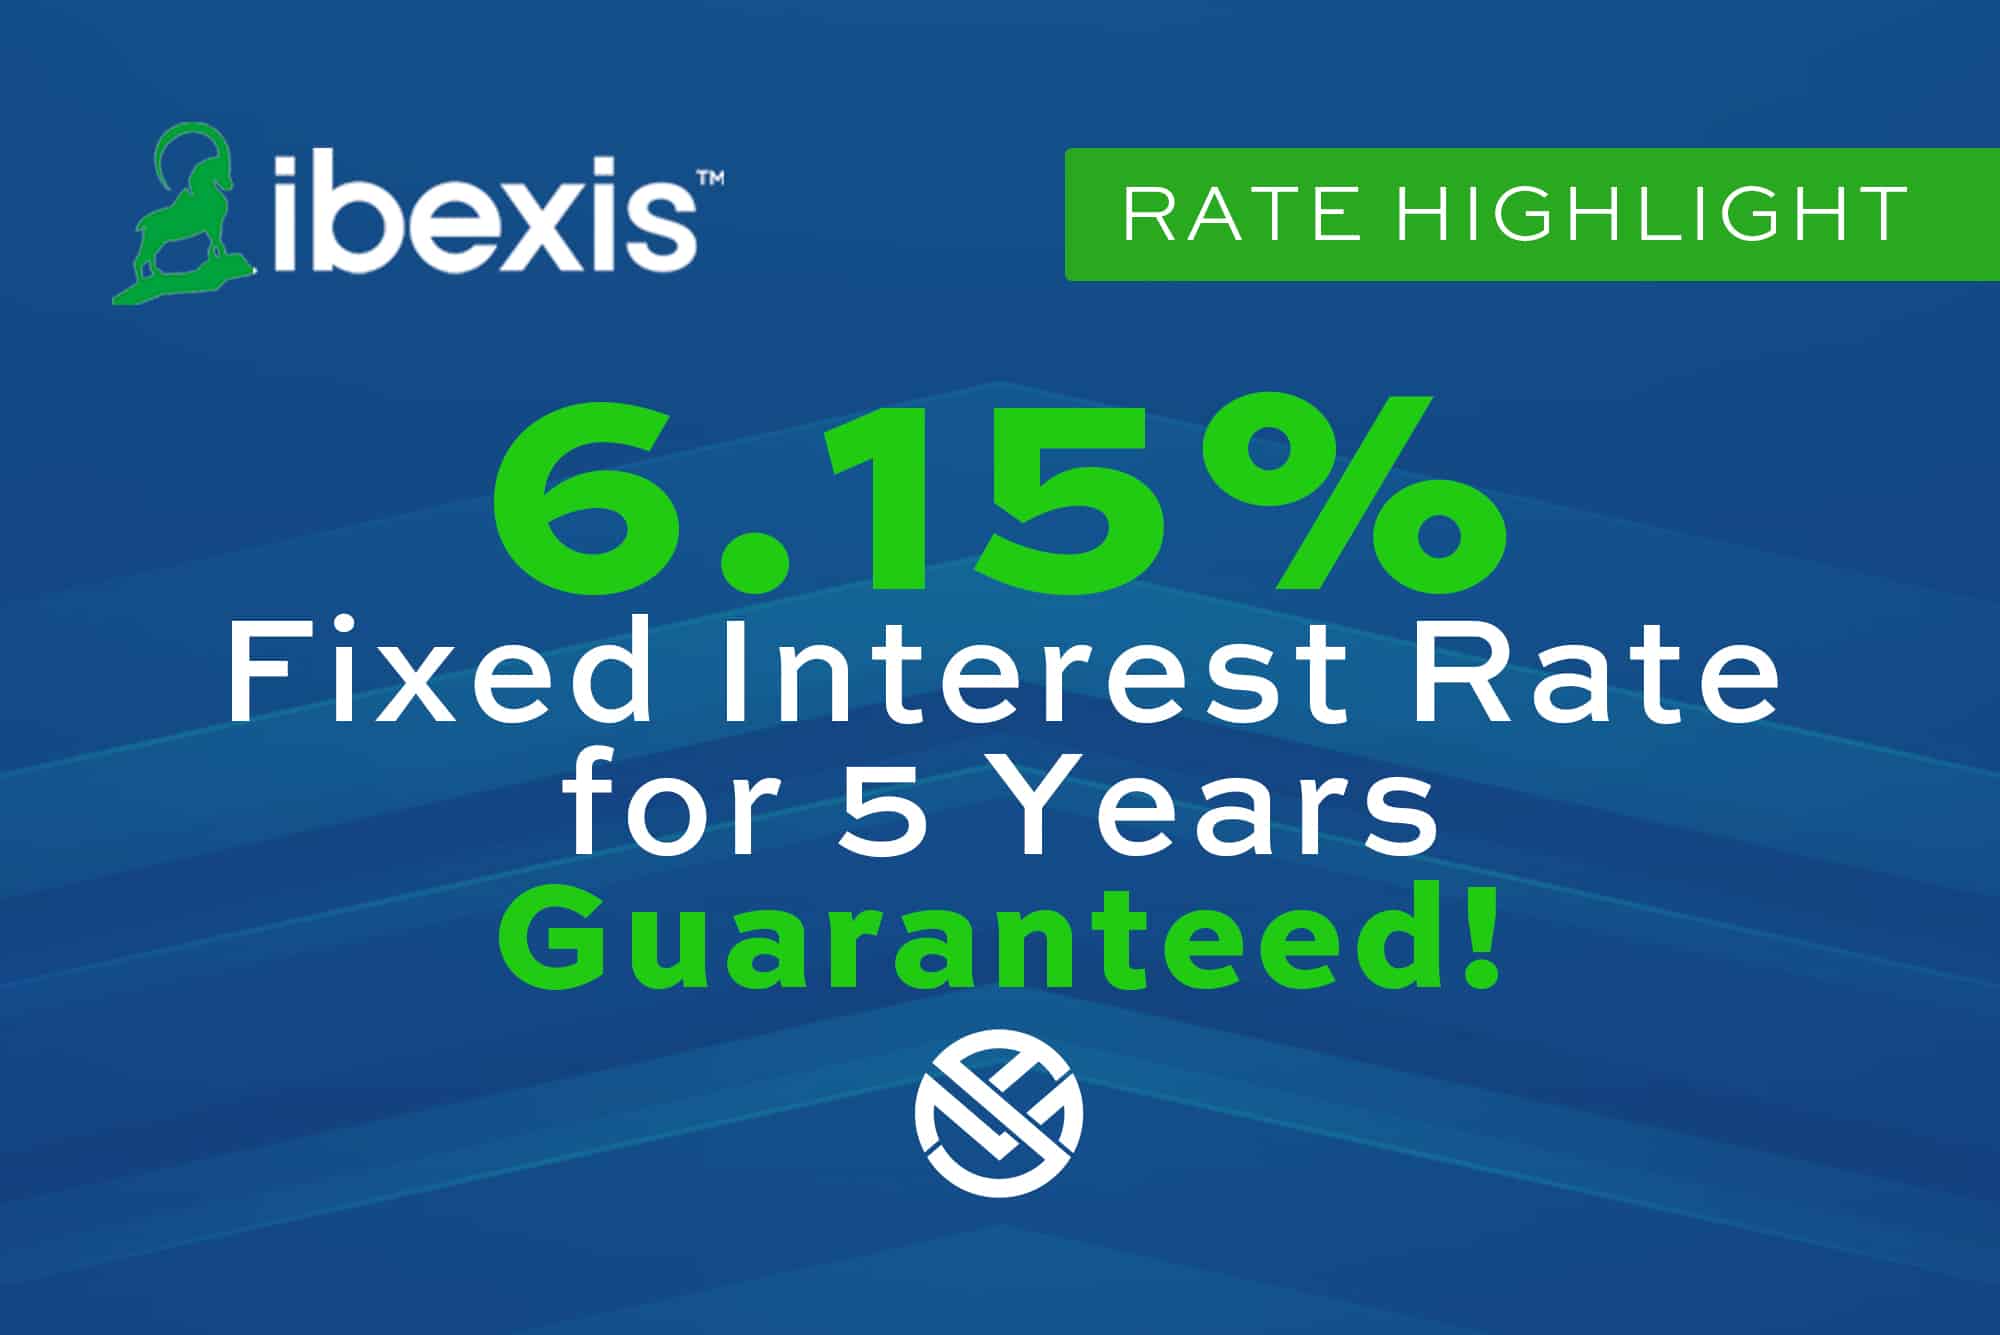 Ibexis fixed annuity rate highlight